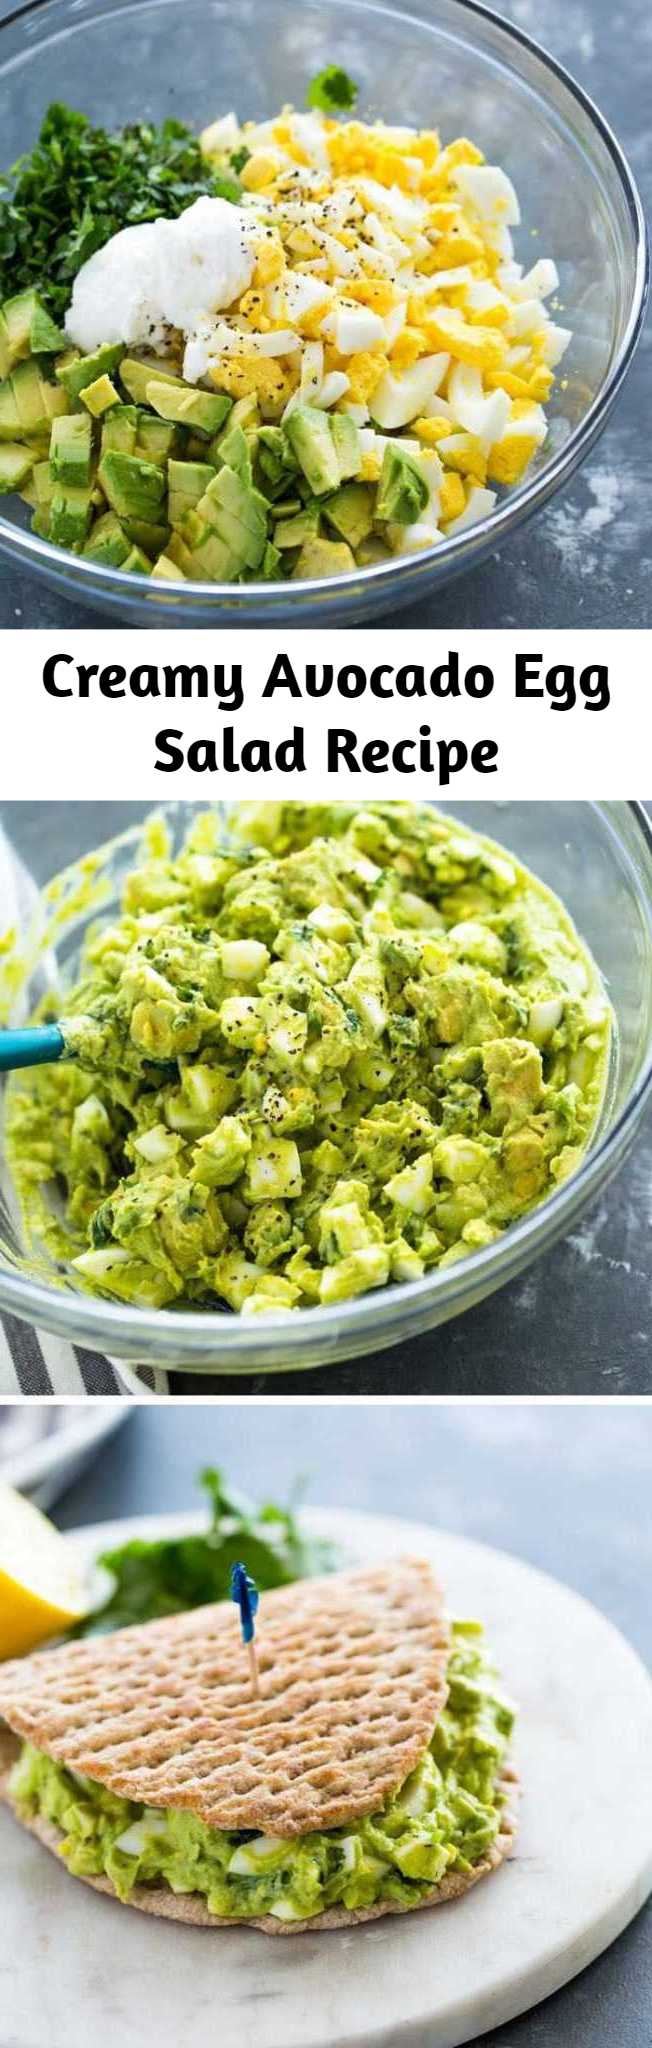 Creamy Avocado Egg Salad Recipe - Spice up the usual egg salad with the addition of avocado. Avocado makes a delicious and nutritious addition to egg salad and thanks to its naturally creamy texture, you can enjoy egg salad without the adding mayo!